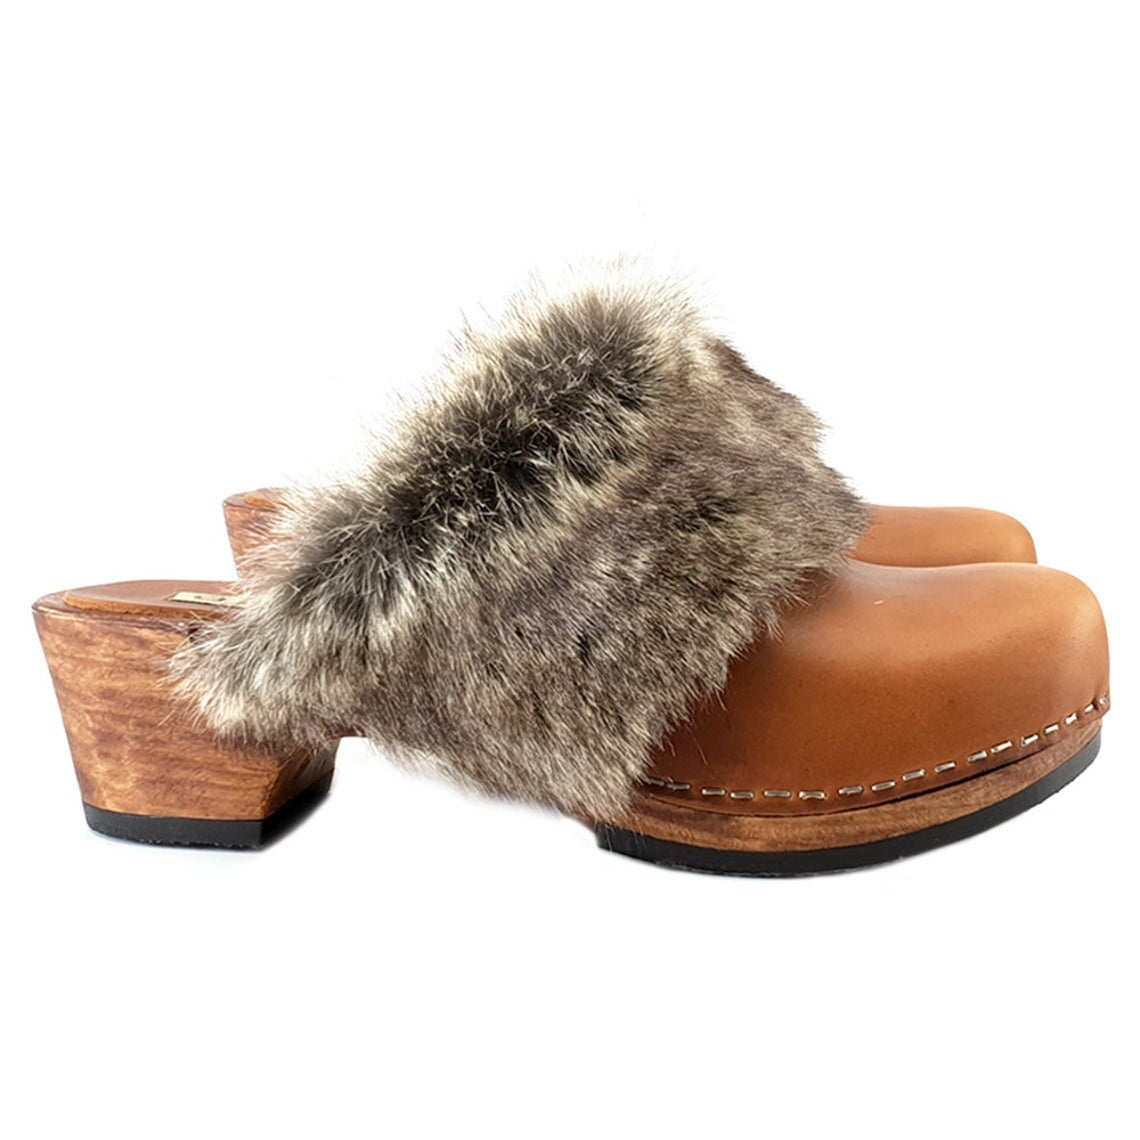 Faux Fur Clogs And Cozy Shearling 